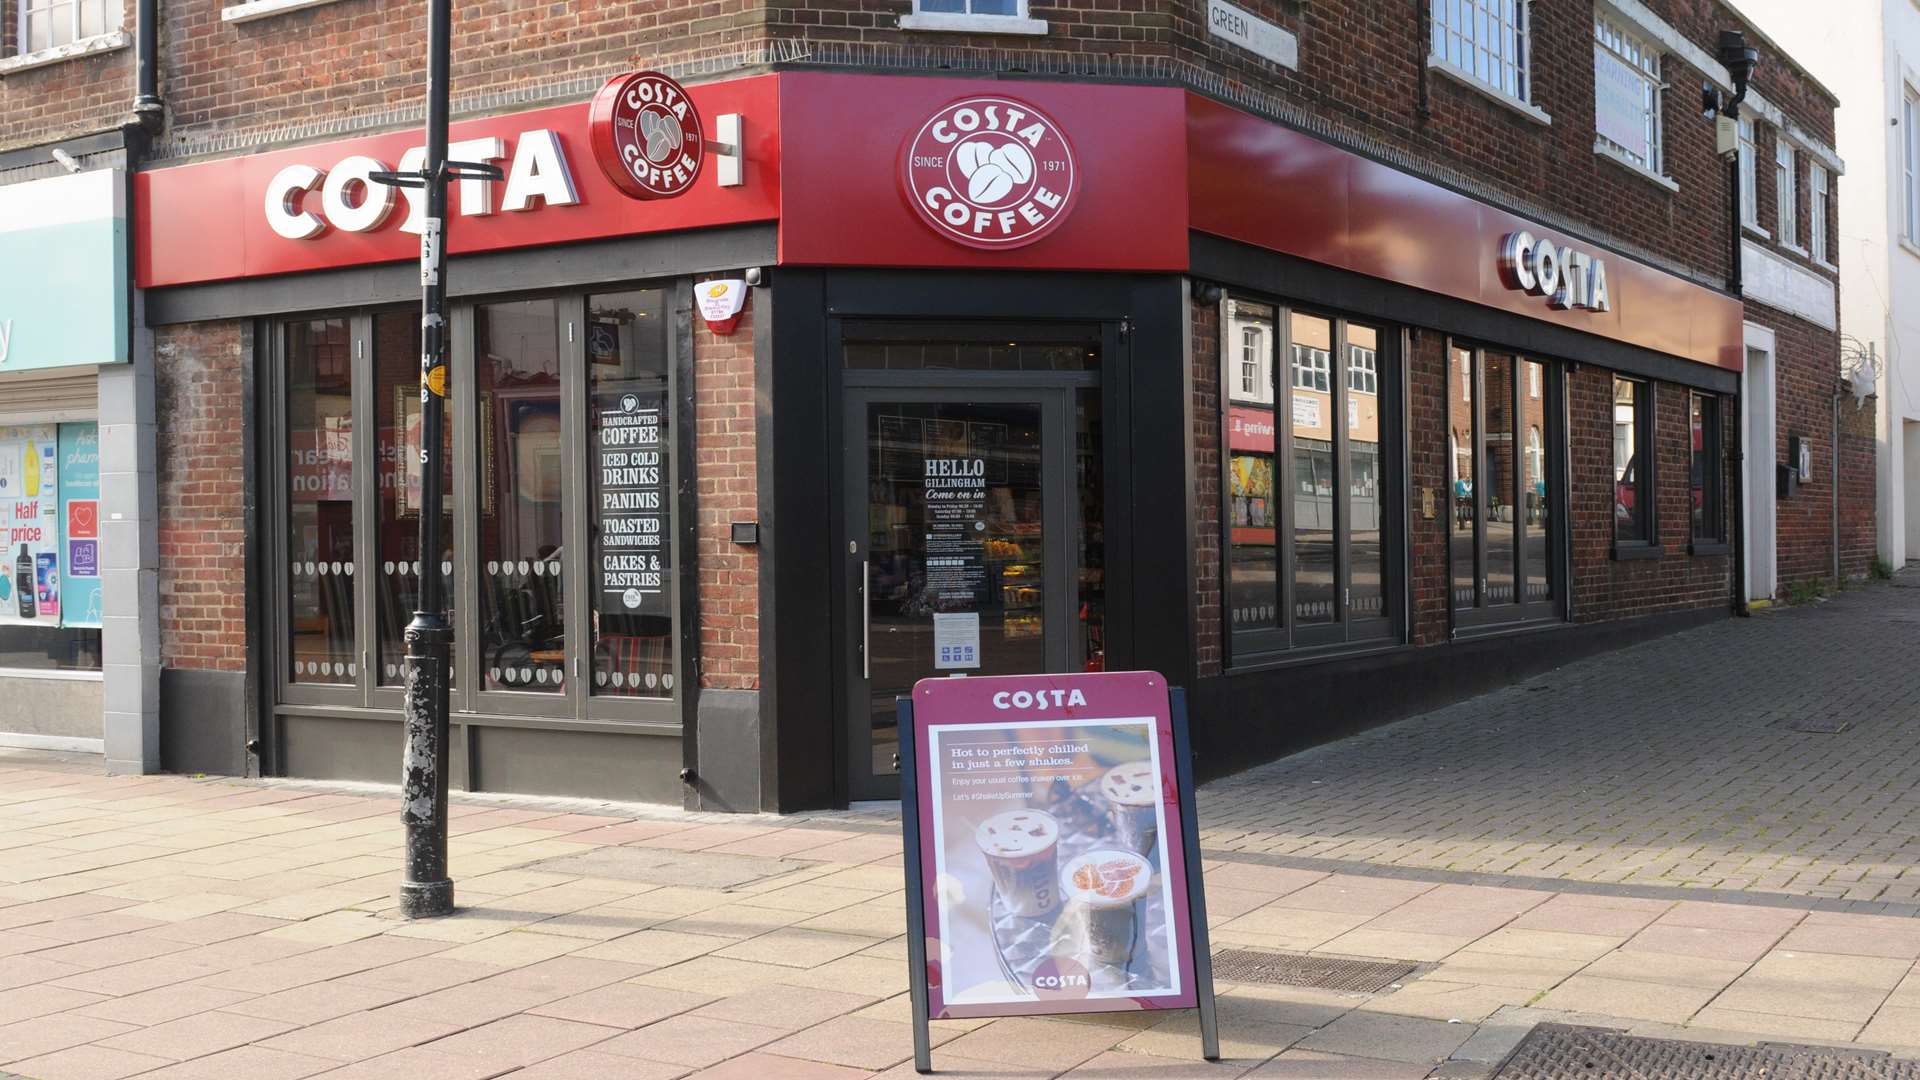 The new coffee shop is on the corner between the High Street and Green Street.